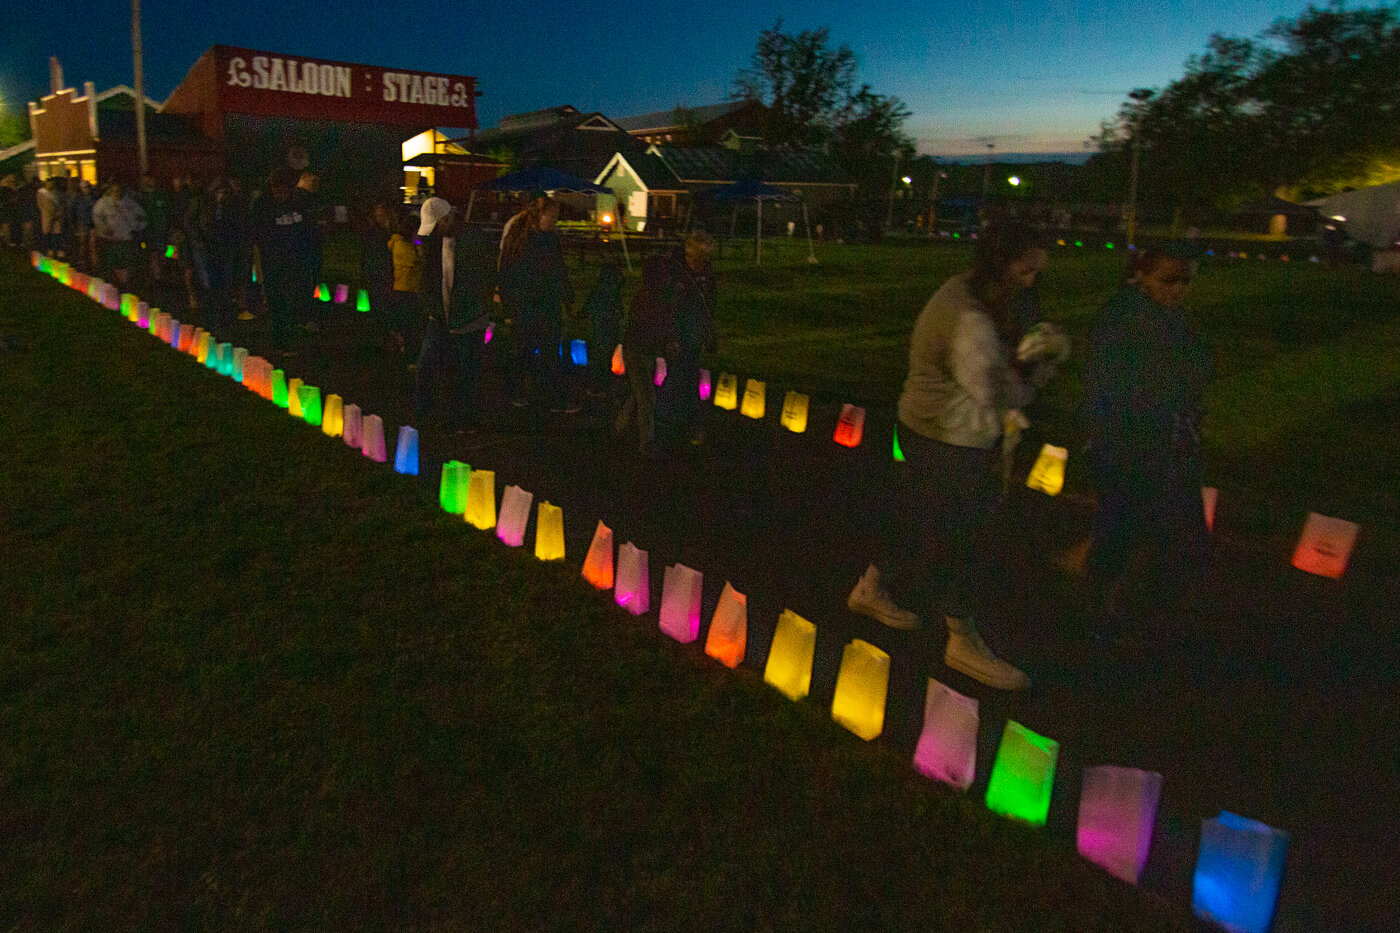 Relay for Life attendees begin the final event of the night at the American Cancer Society's Relay for Life, the luminaria walk. Each luminaria was dedicated to the honor or memory of a loved one.